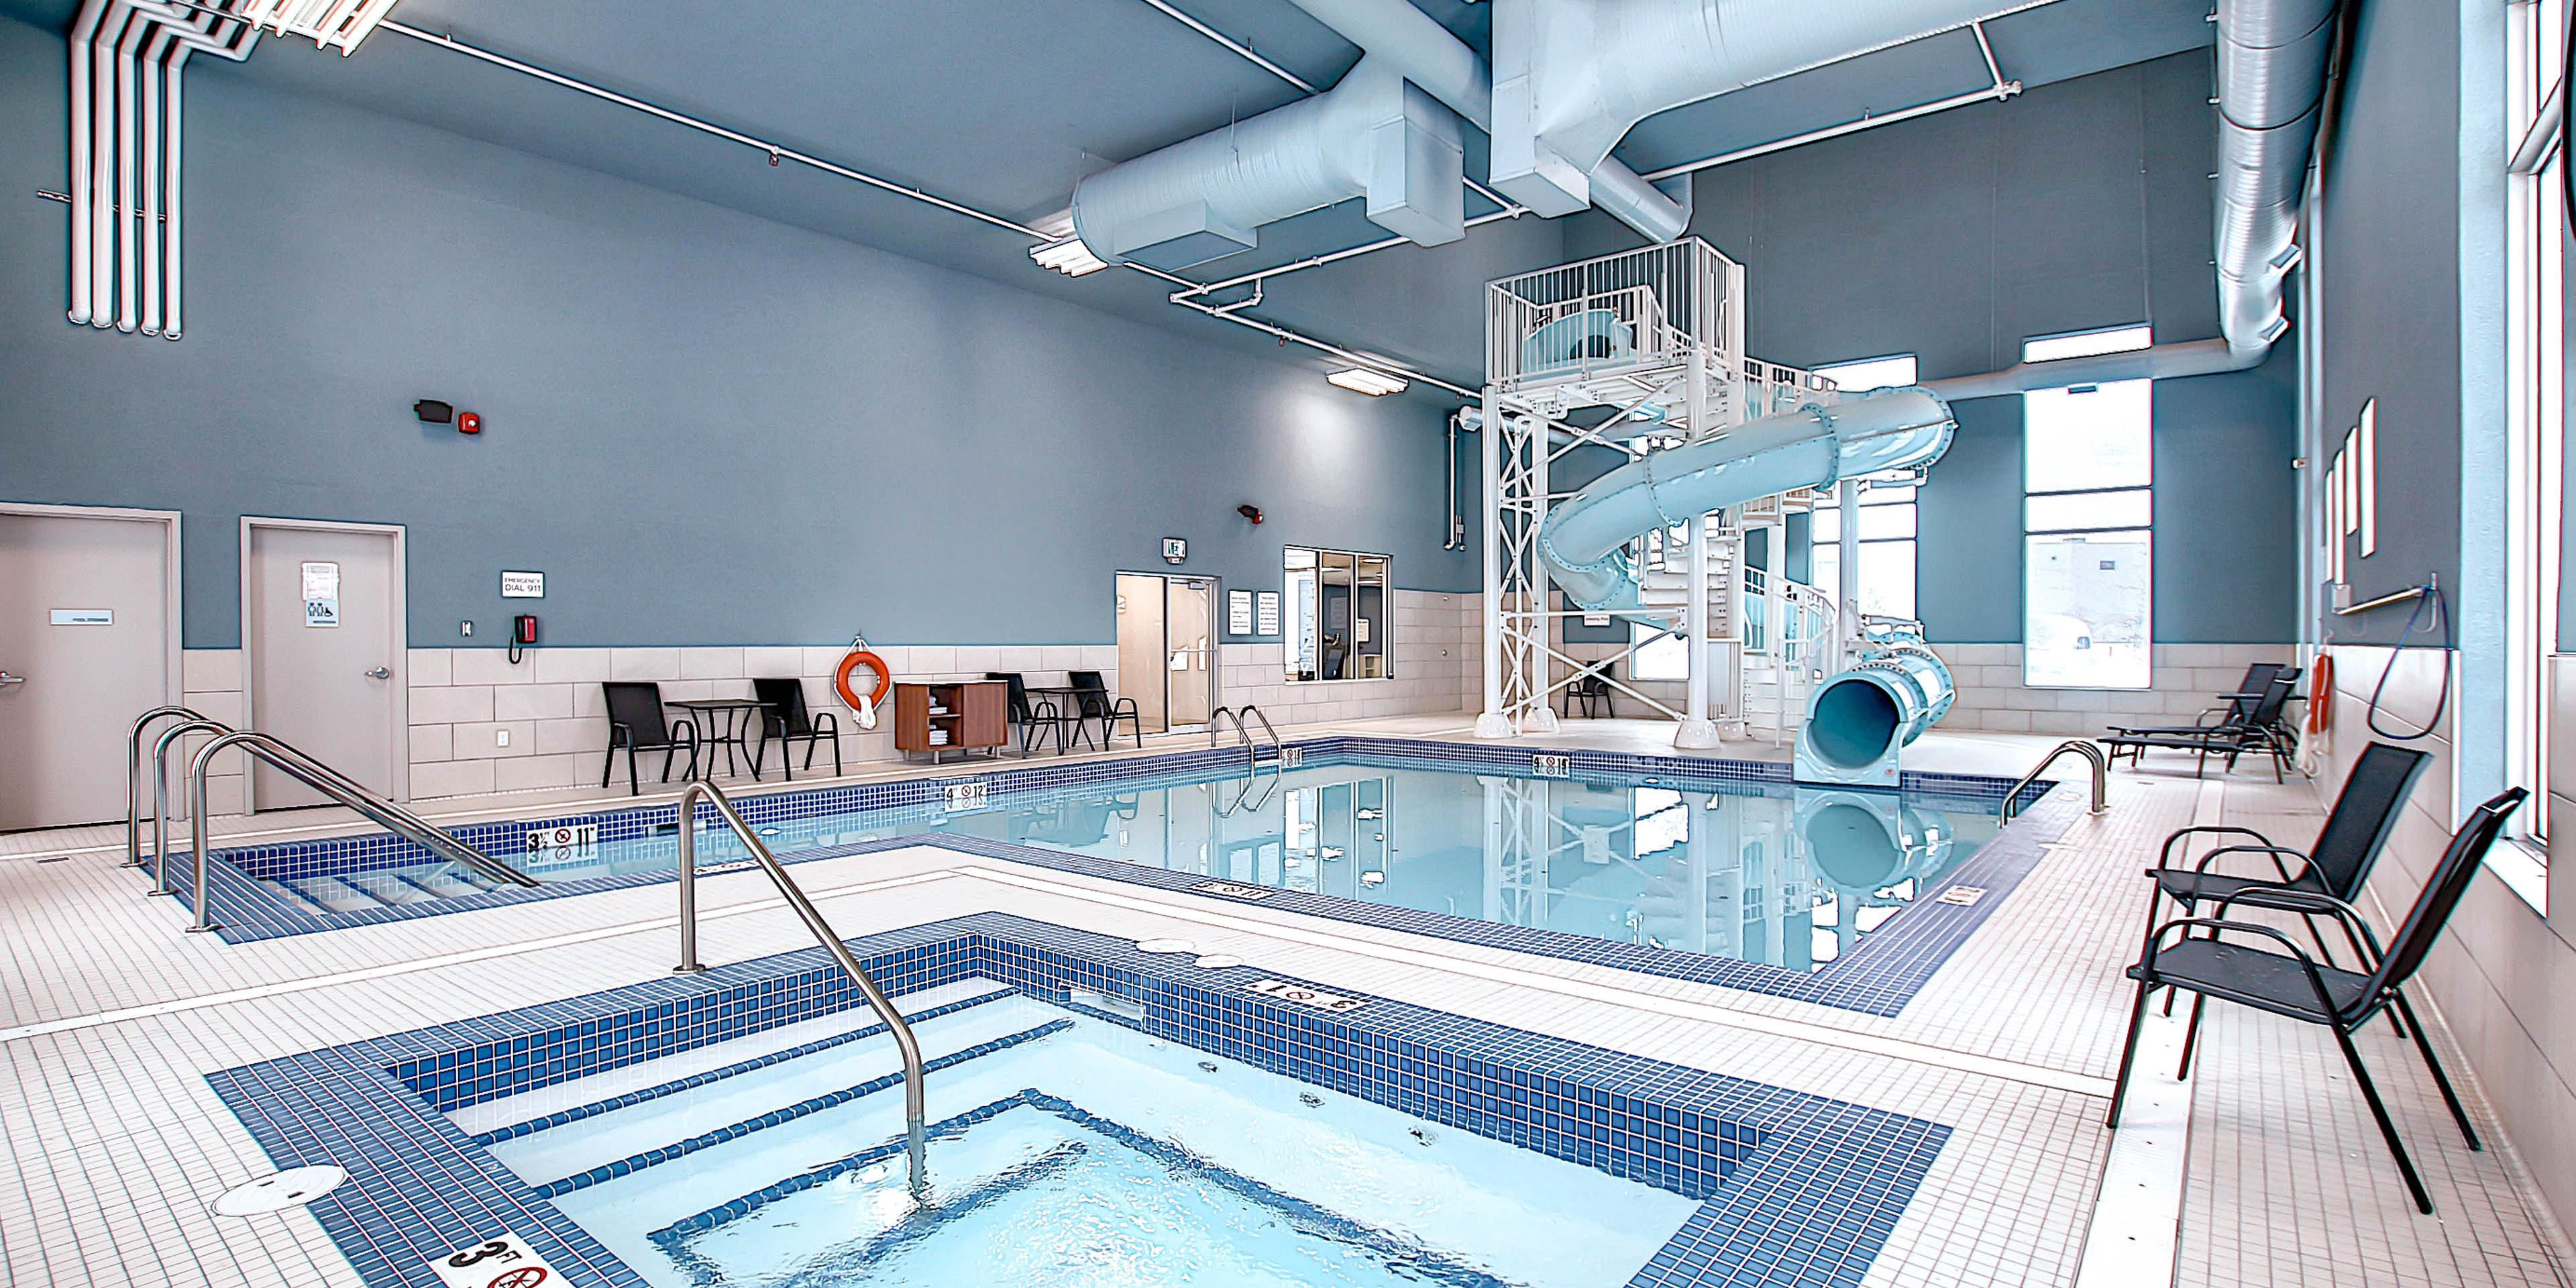 We've got fun for the whole family! Our hotel features an indoor heated swimming pool, waterslide and hot tub. We're the only hotel in the area with an indoor water slide and you won't want to miss the chance to check it out. 